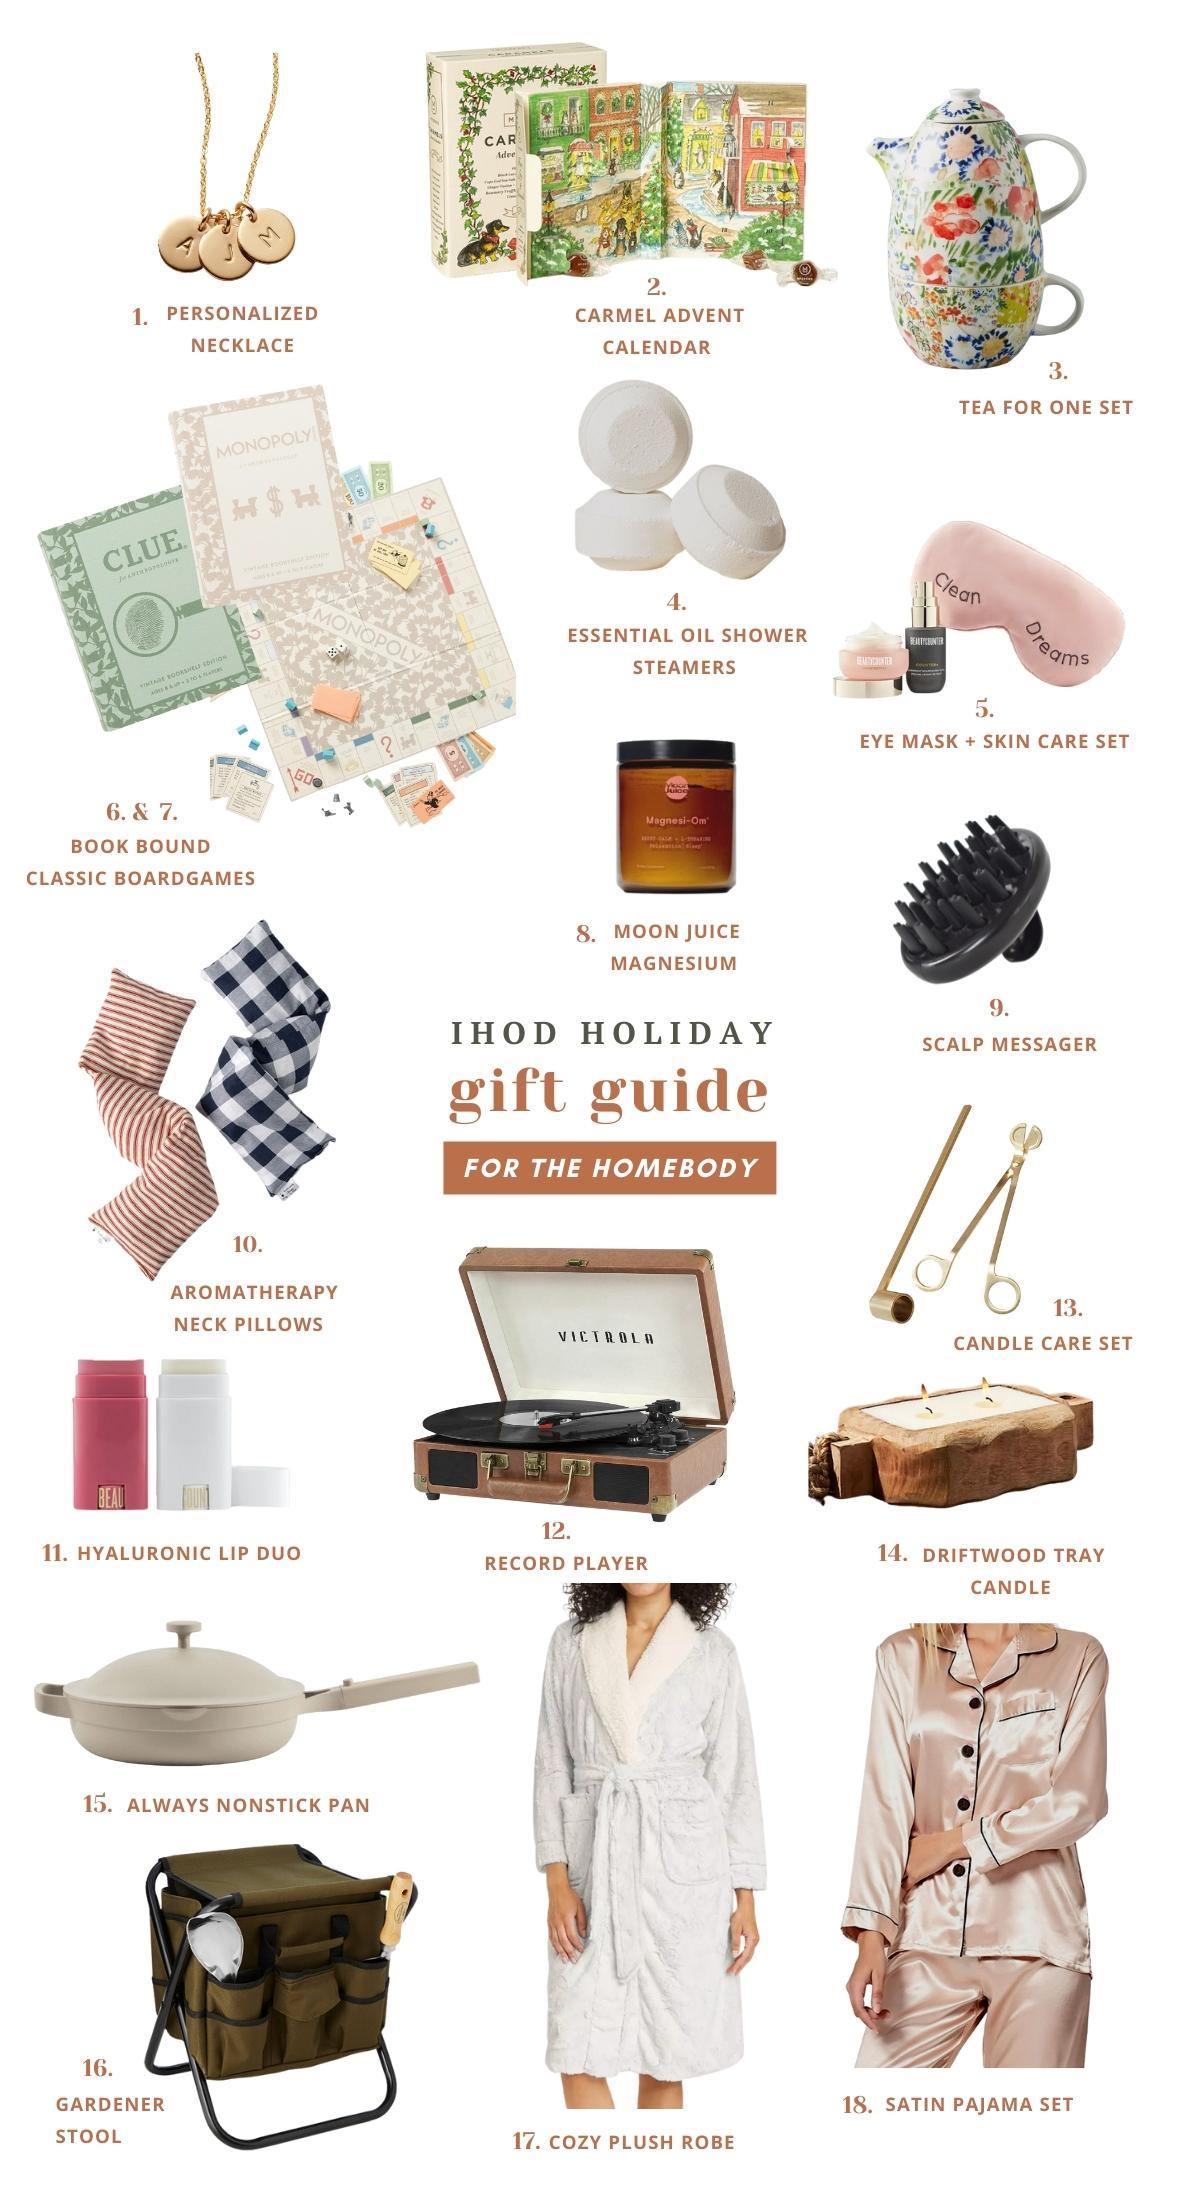 More Like Home: 2021 Gift Guide for Adults